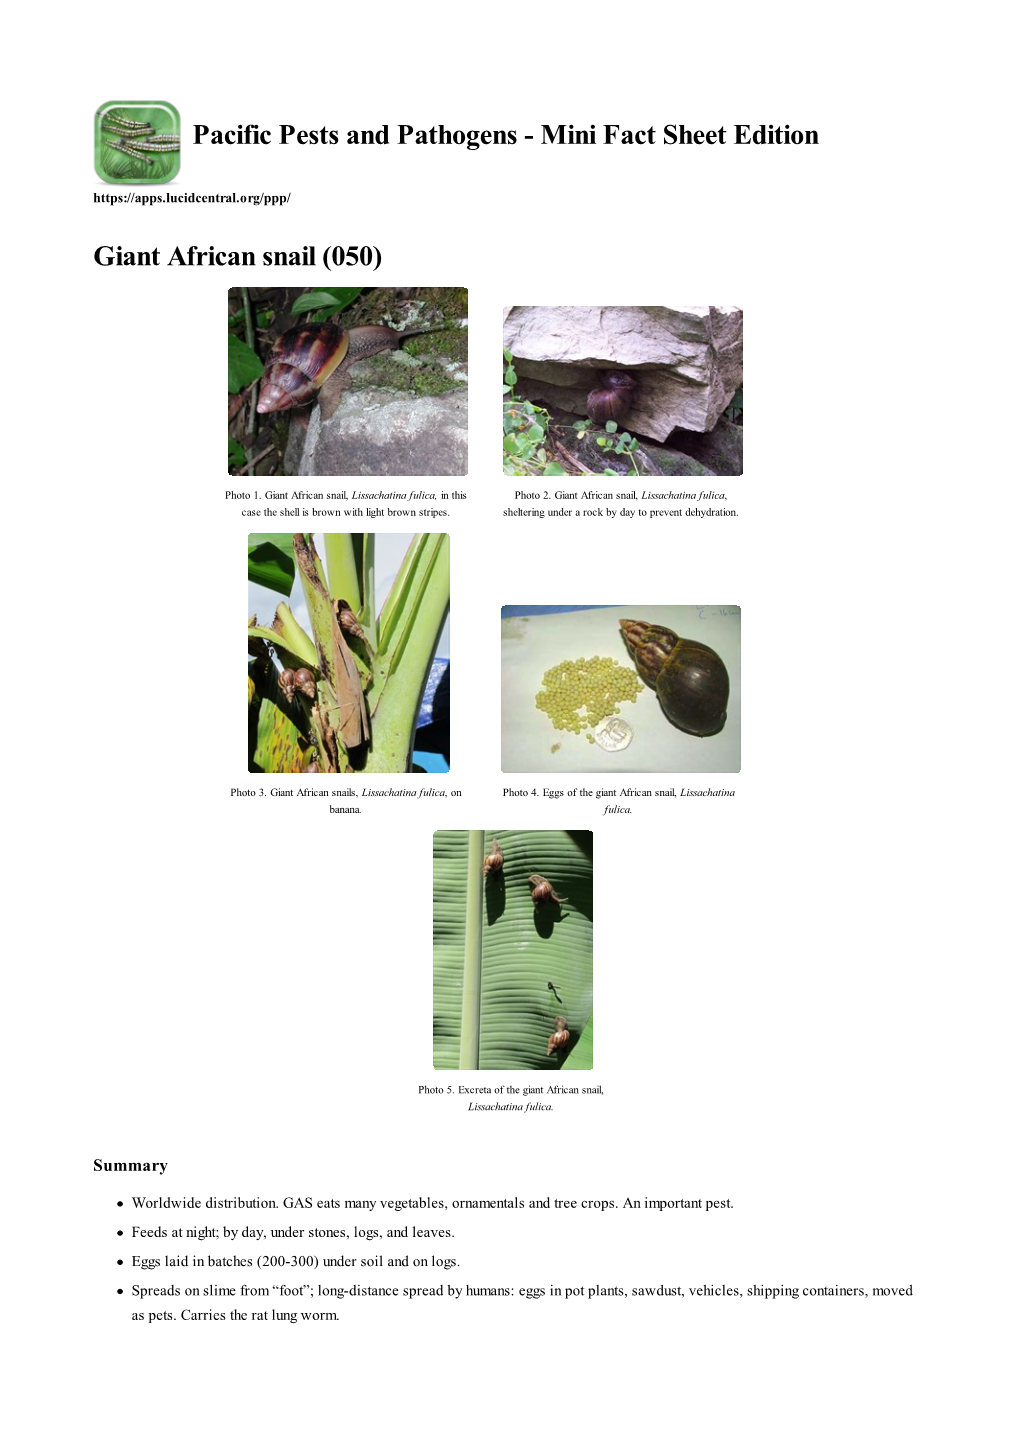 Giant African Snail (050)